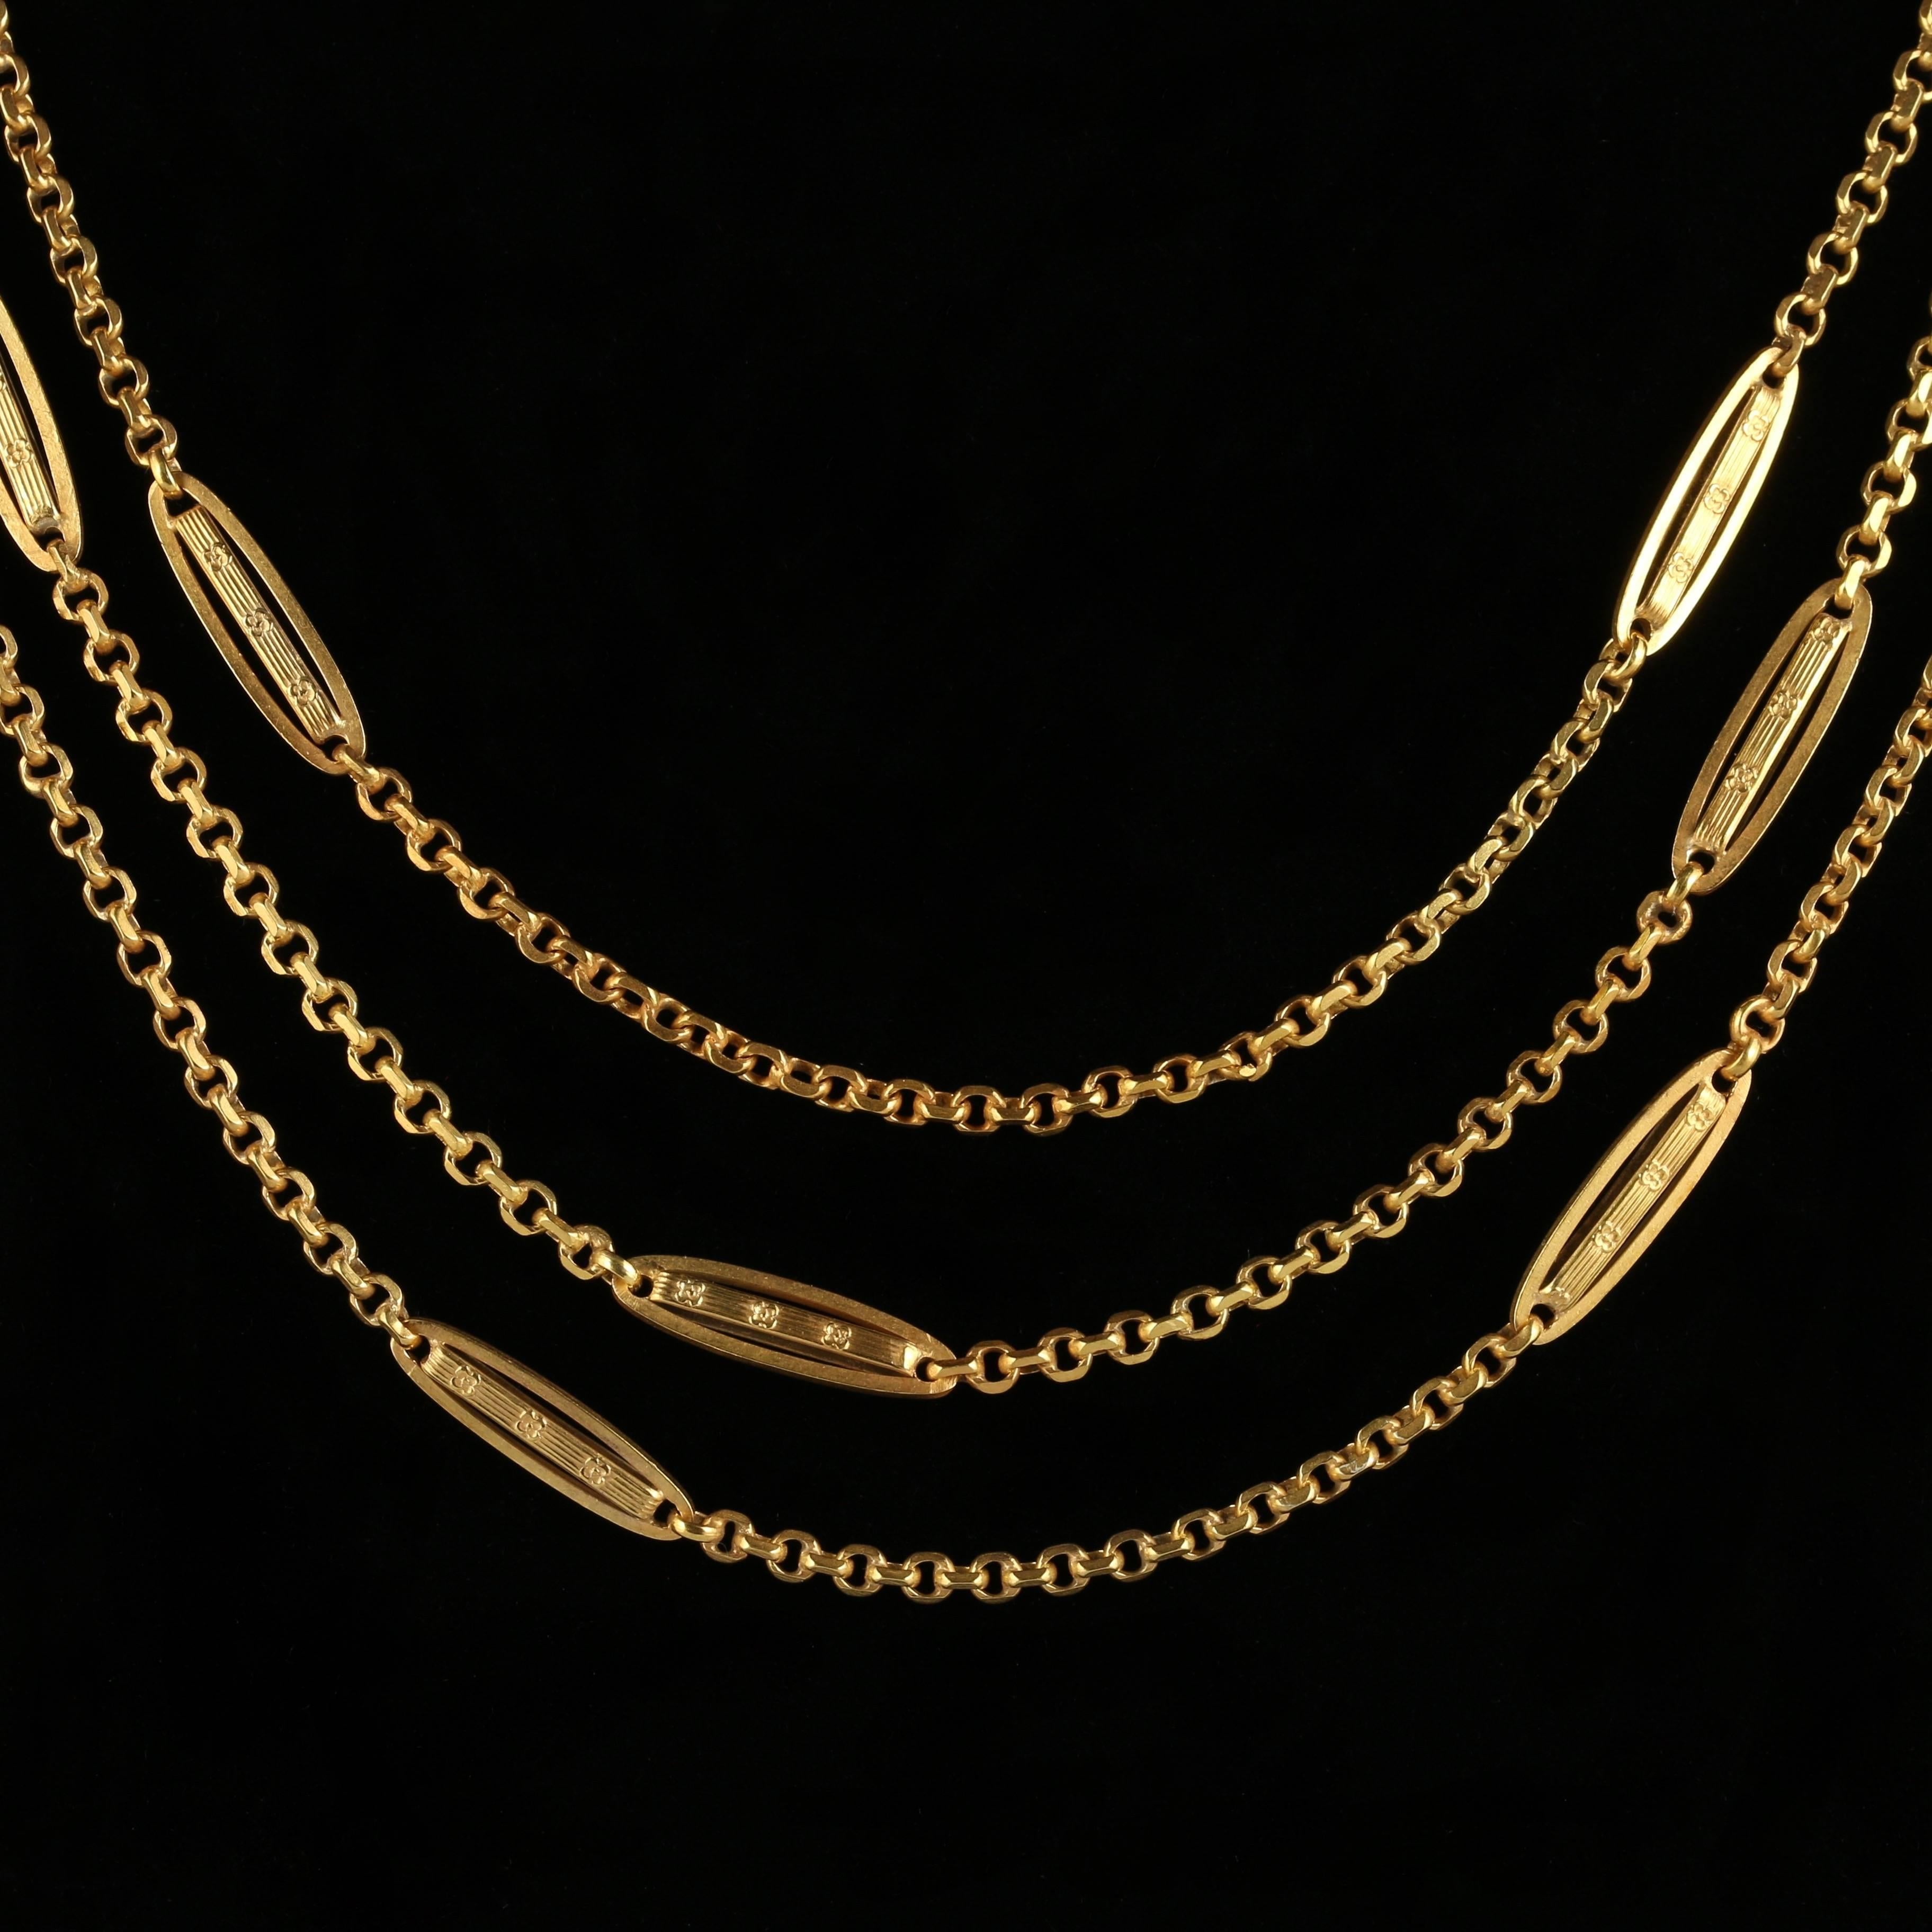 For more details please click continue reading down below..

This fabulous long Victorian guard chain is set with lovely fancy panels and links.

Set in 18ct Yellow Gold on Silver.

The lovely long chain can be worn twice around the neck or left as